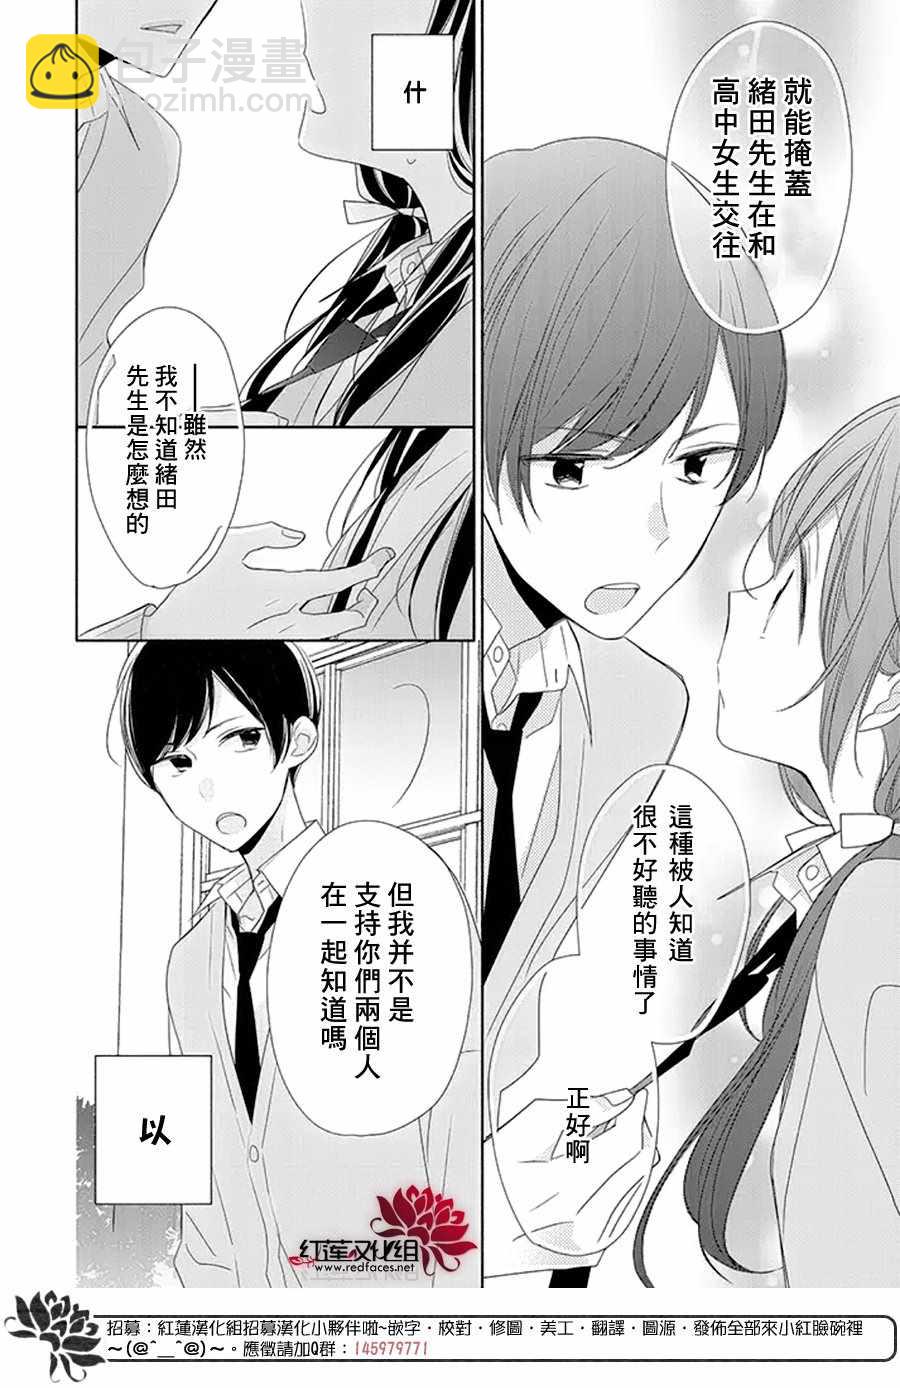 If given a second chance - 15話 - 6